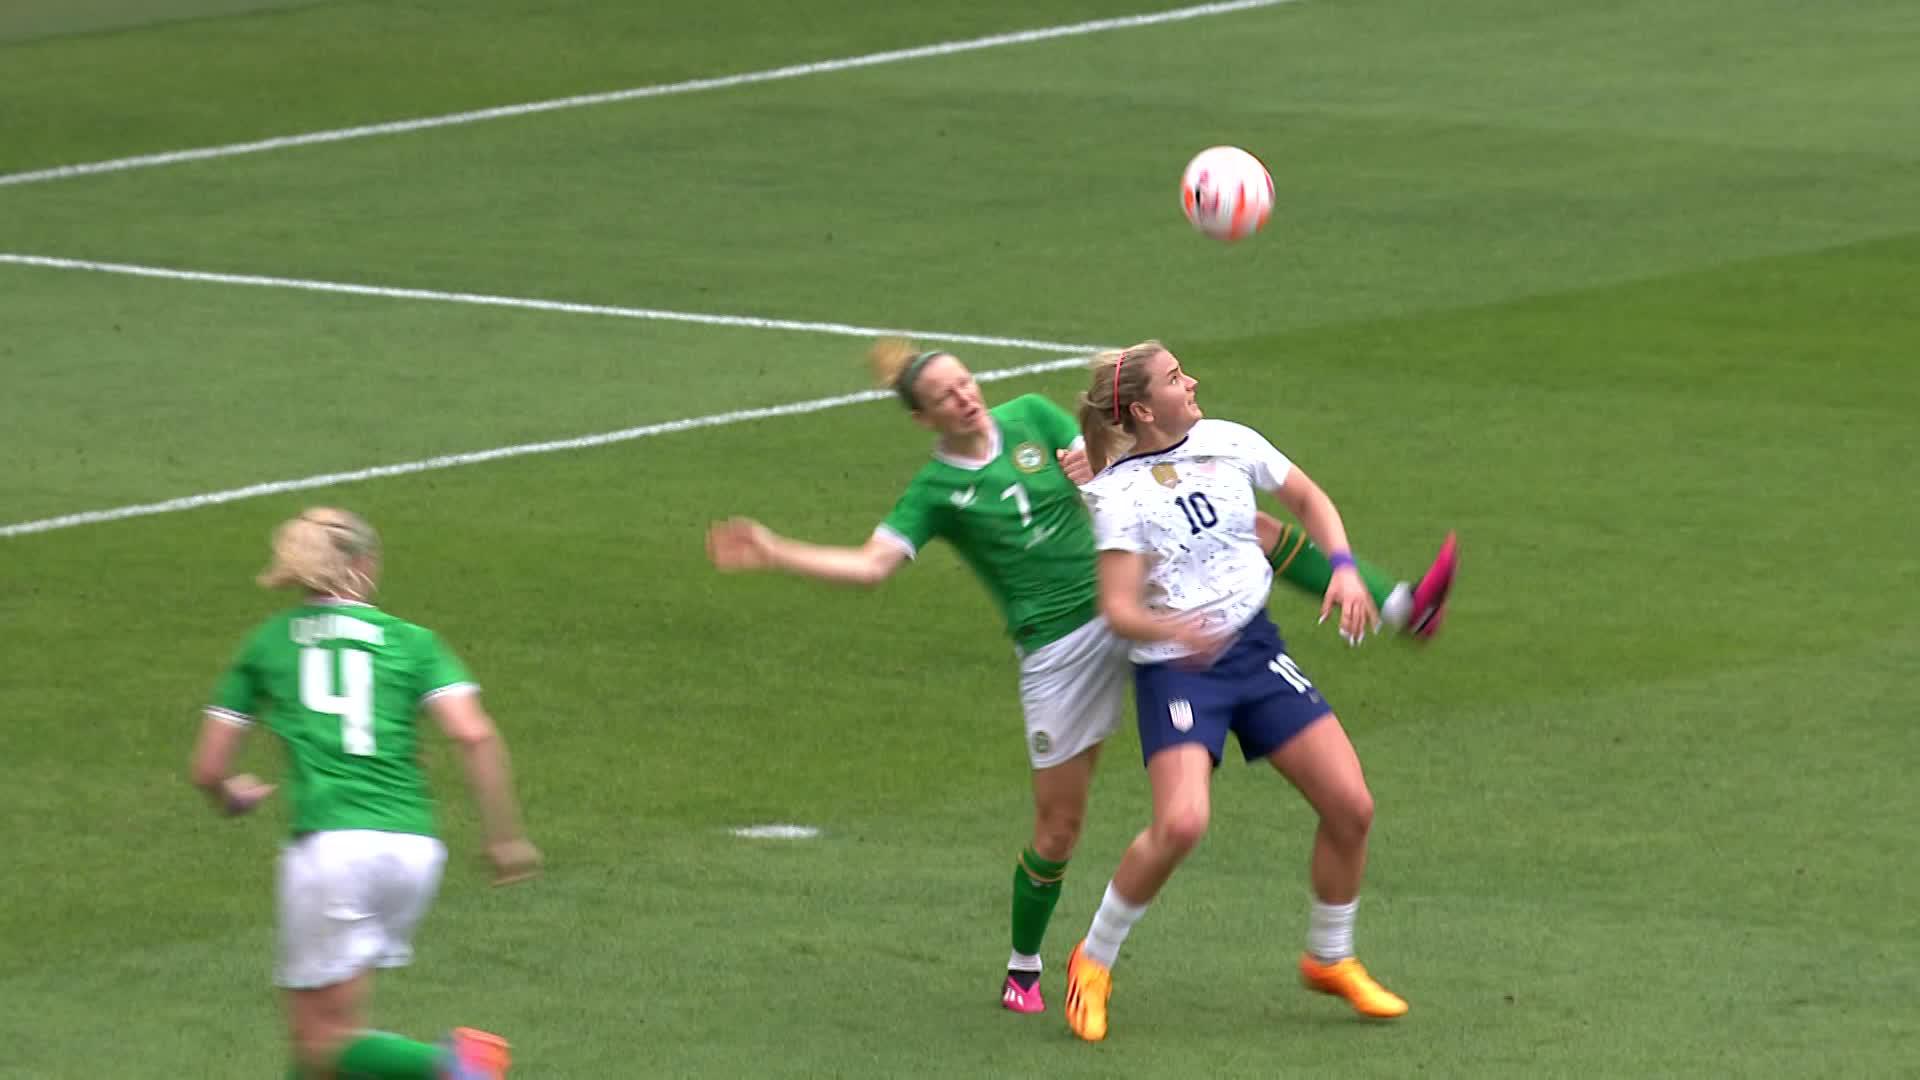 She draws the penalty, and she converts! 

🫡 @lindseyhoran”